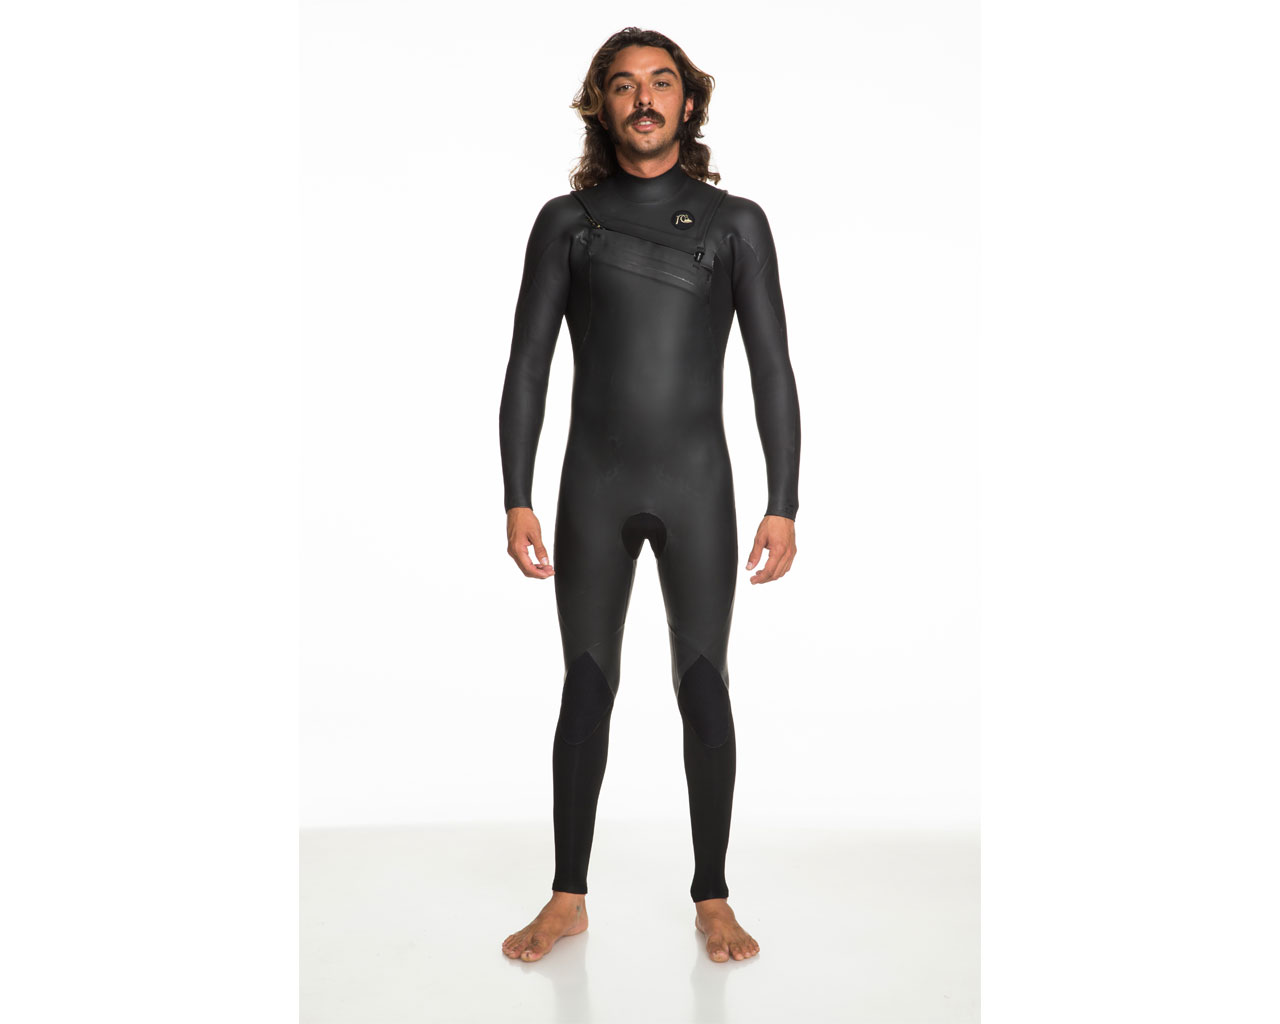 Quiksilver FW20/21 Wetsuit Preview